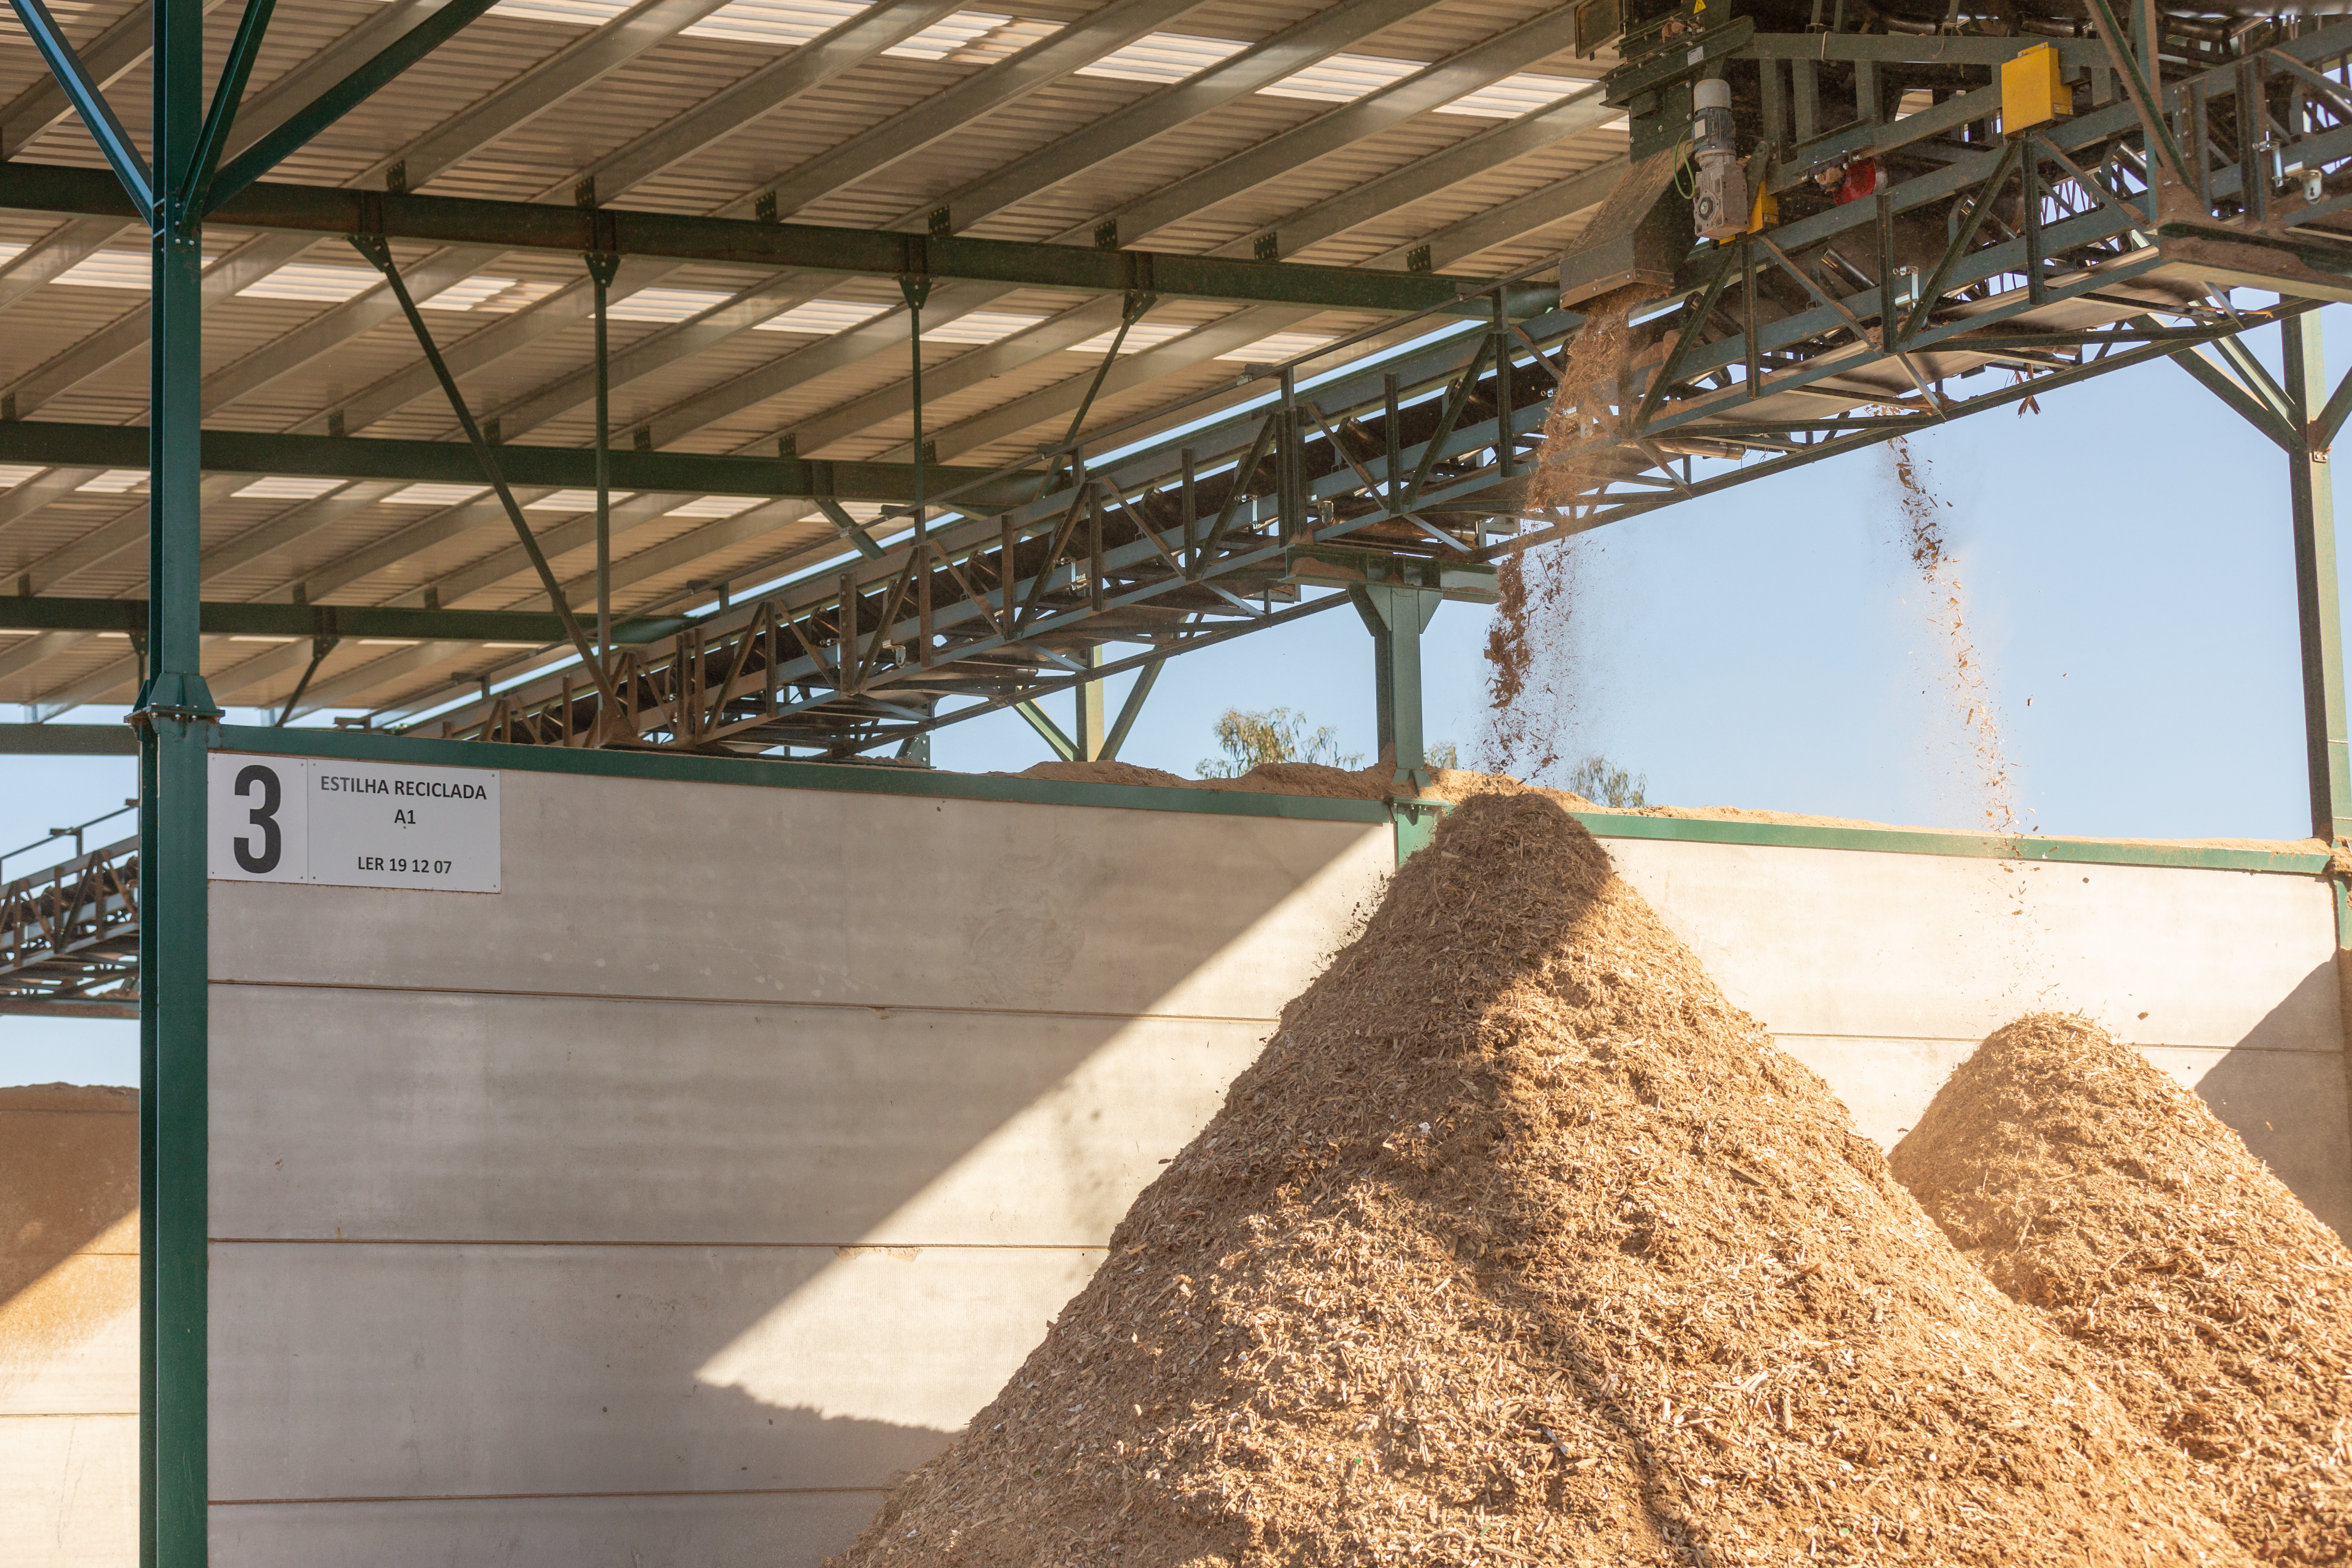 Sonae Arauco invests over €5M in two new wood recycling centres in Portugal